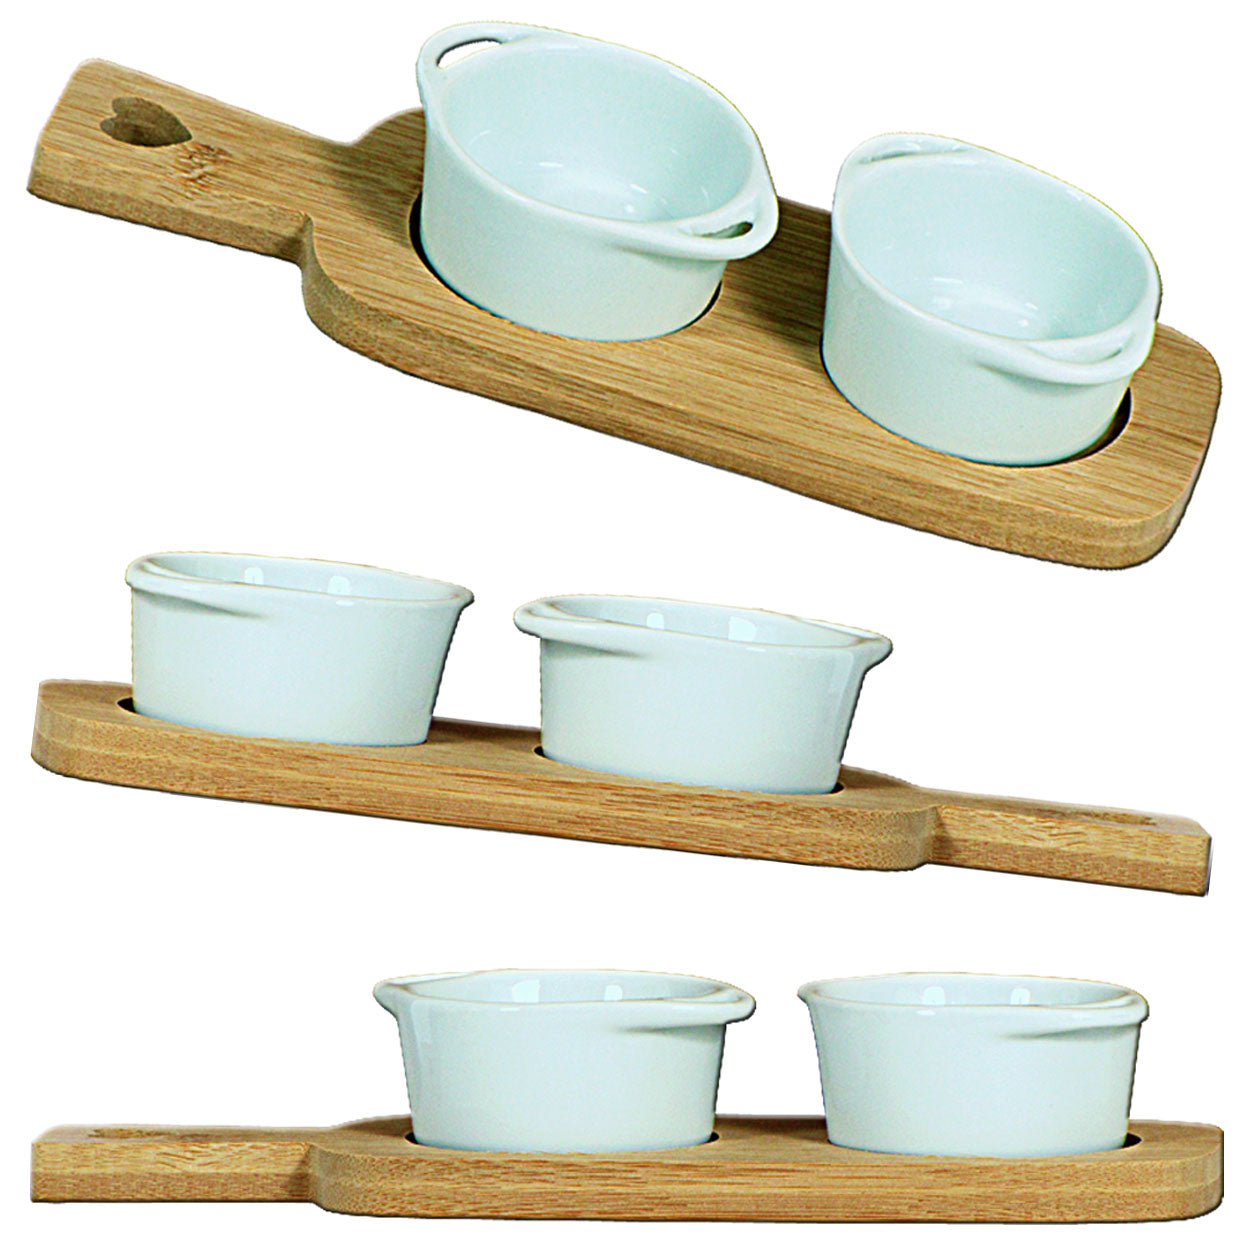 5756464: Bamboo Tray w. Dishes